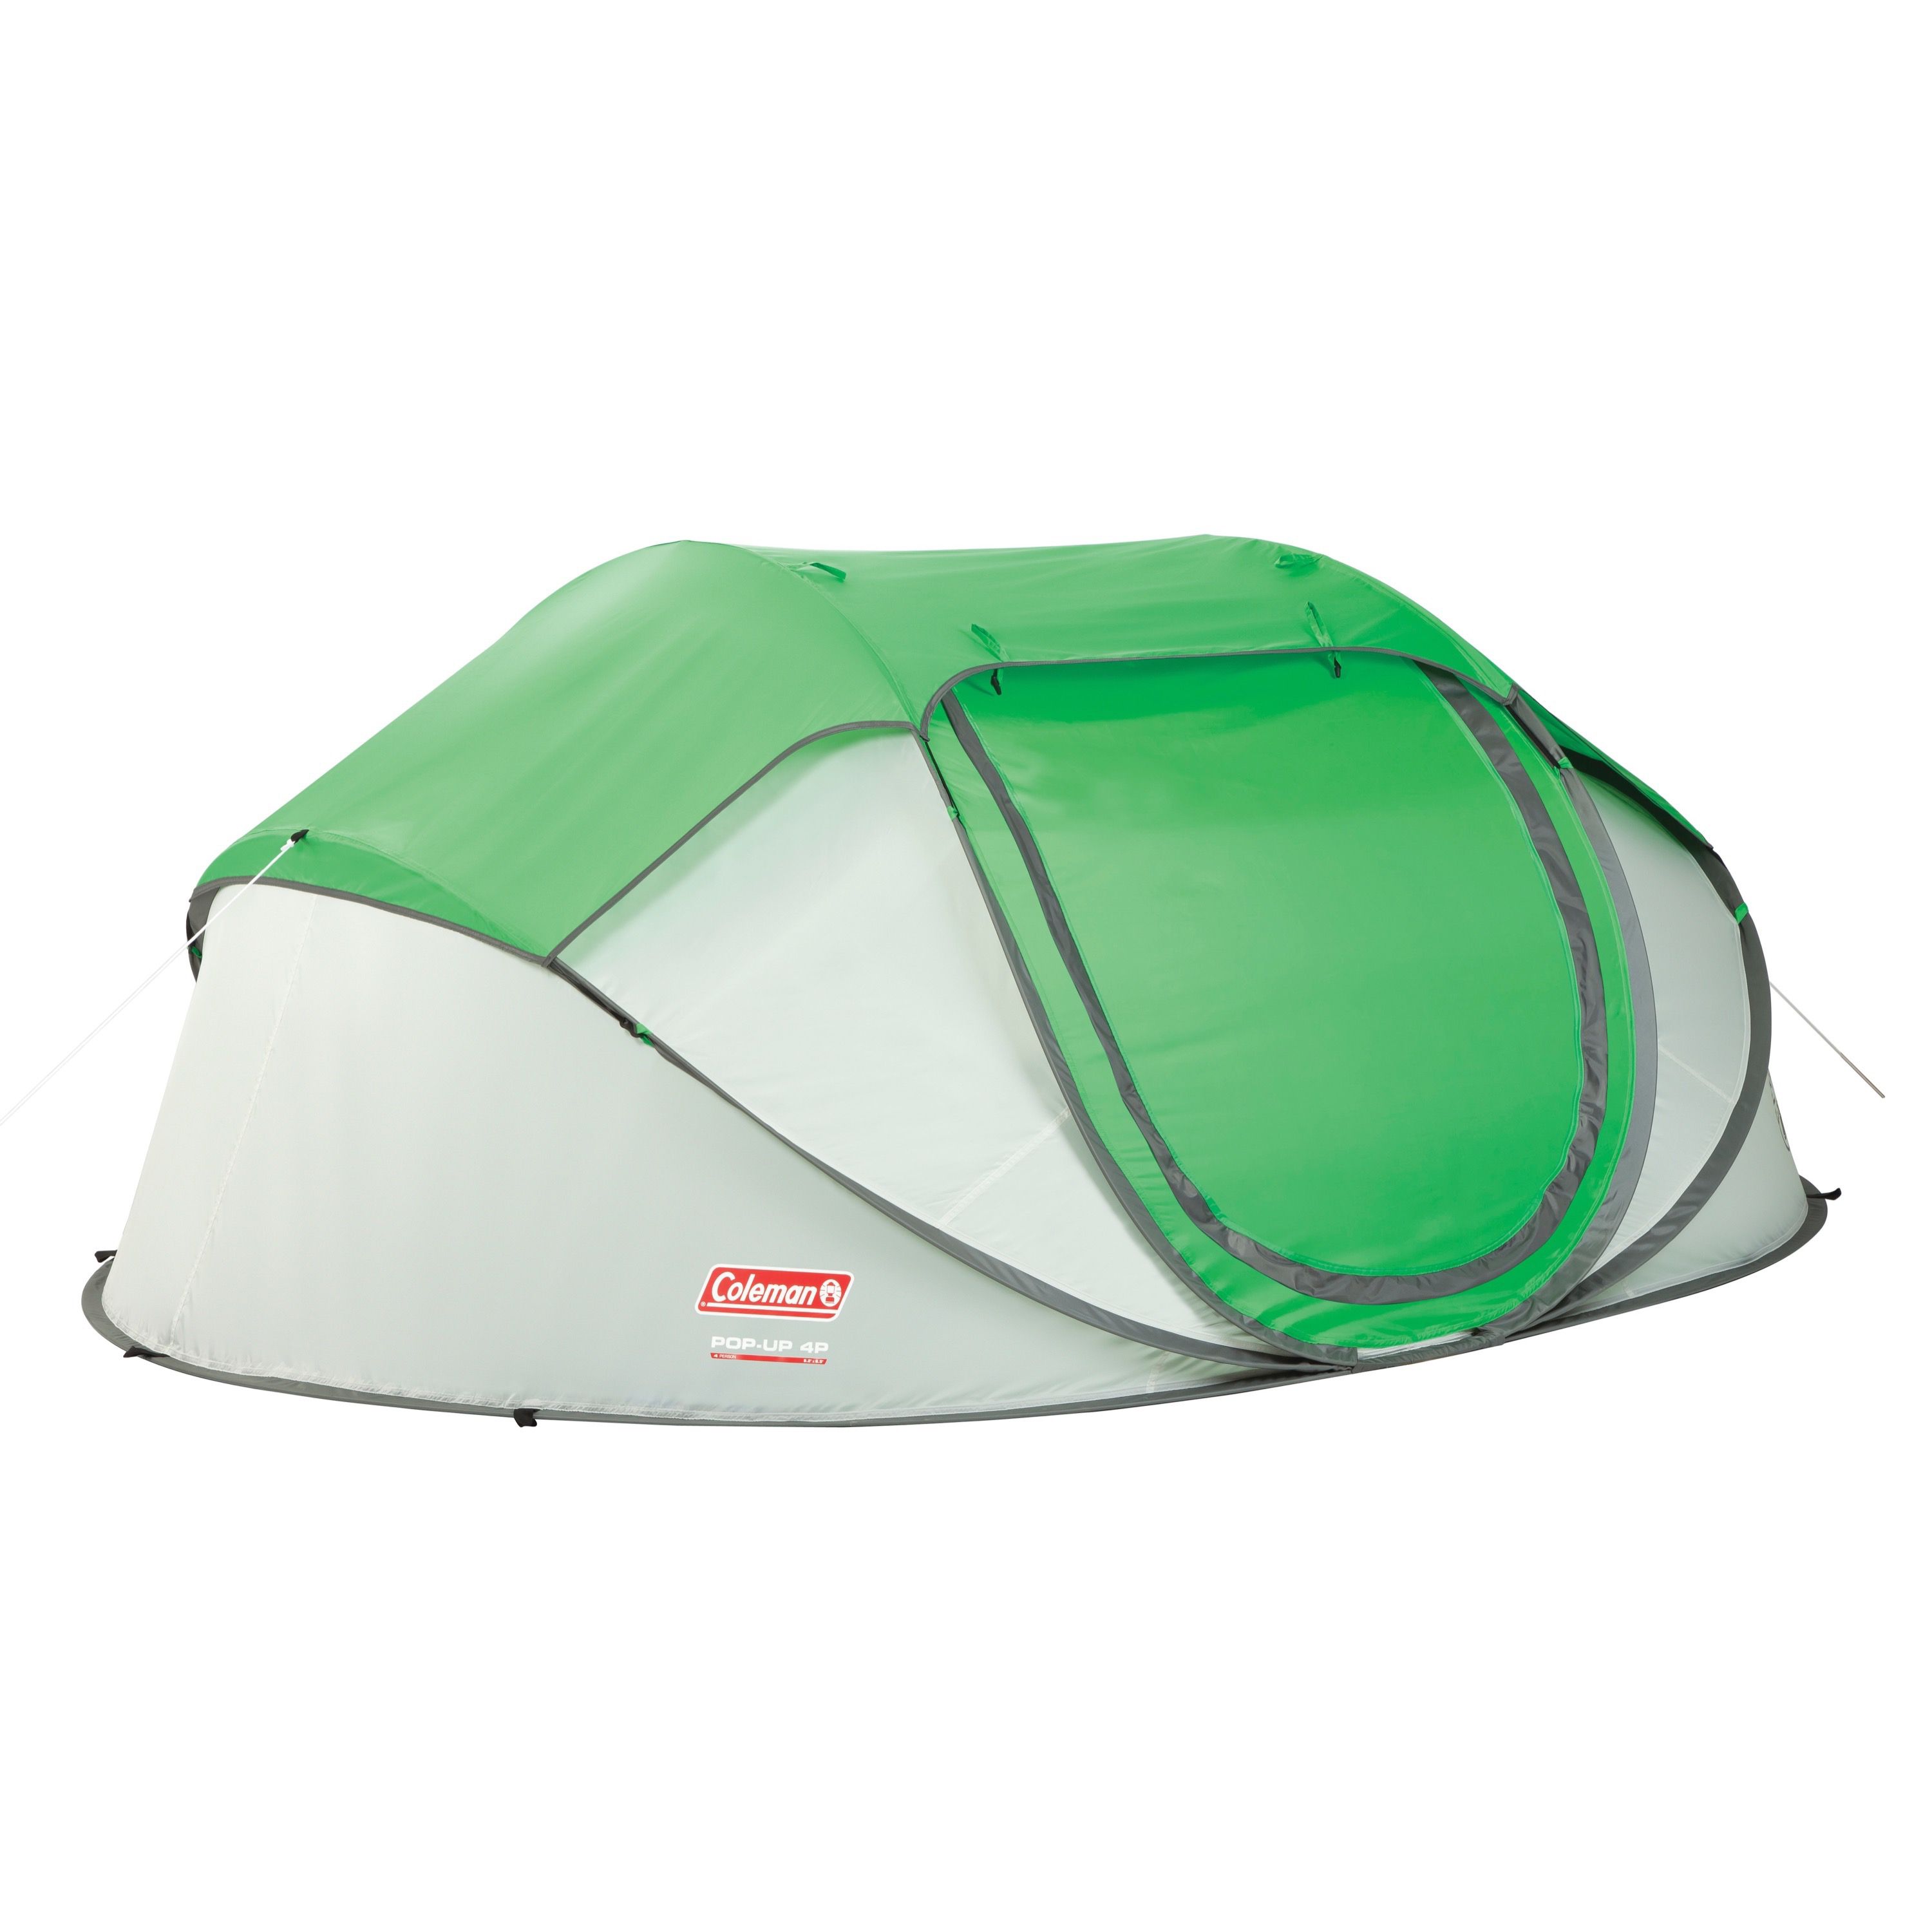 Coleman 4-Person Instant Pop-Up Tent 1 Room, Green - image 1 of 6